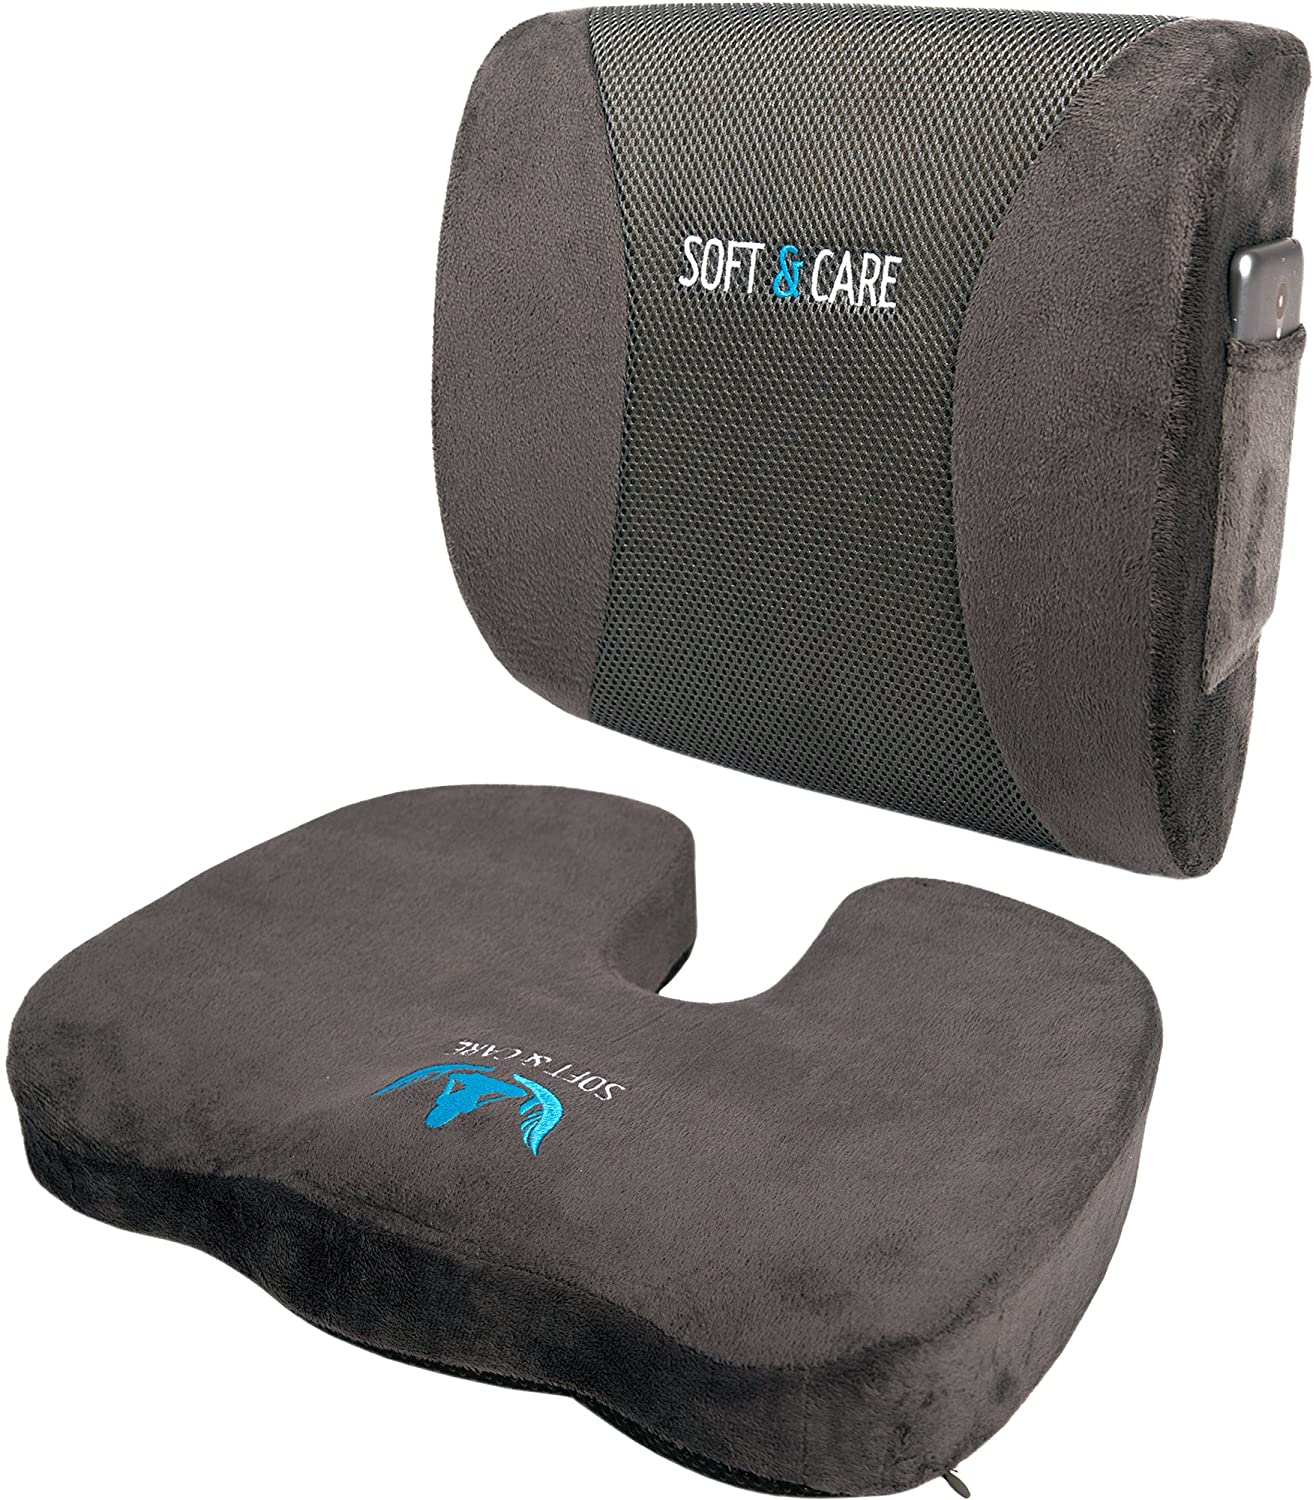 ''SOFTaCARE Seat Cushion Coccyx Orthopedic Memory Foam and Lumbar Support PILLOW, Set of 2, Dark Grey